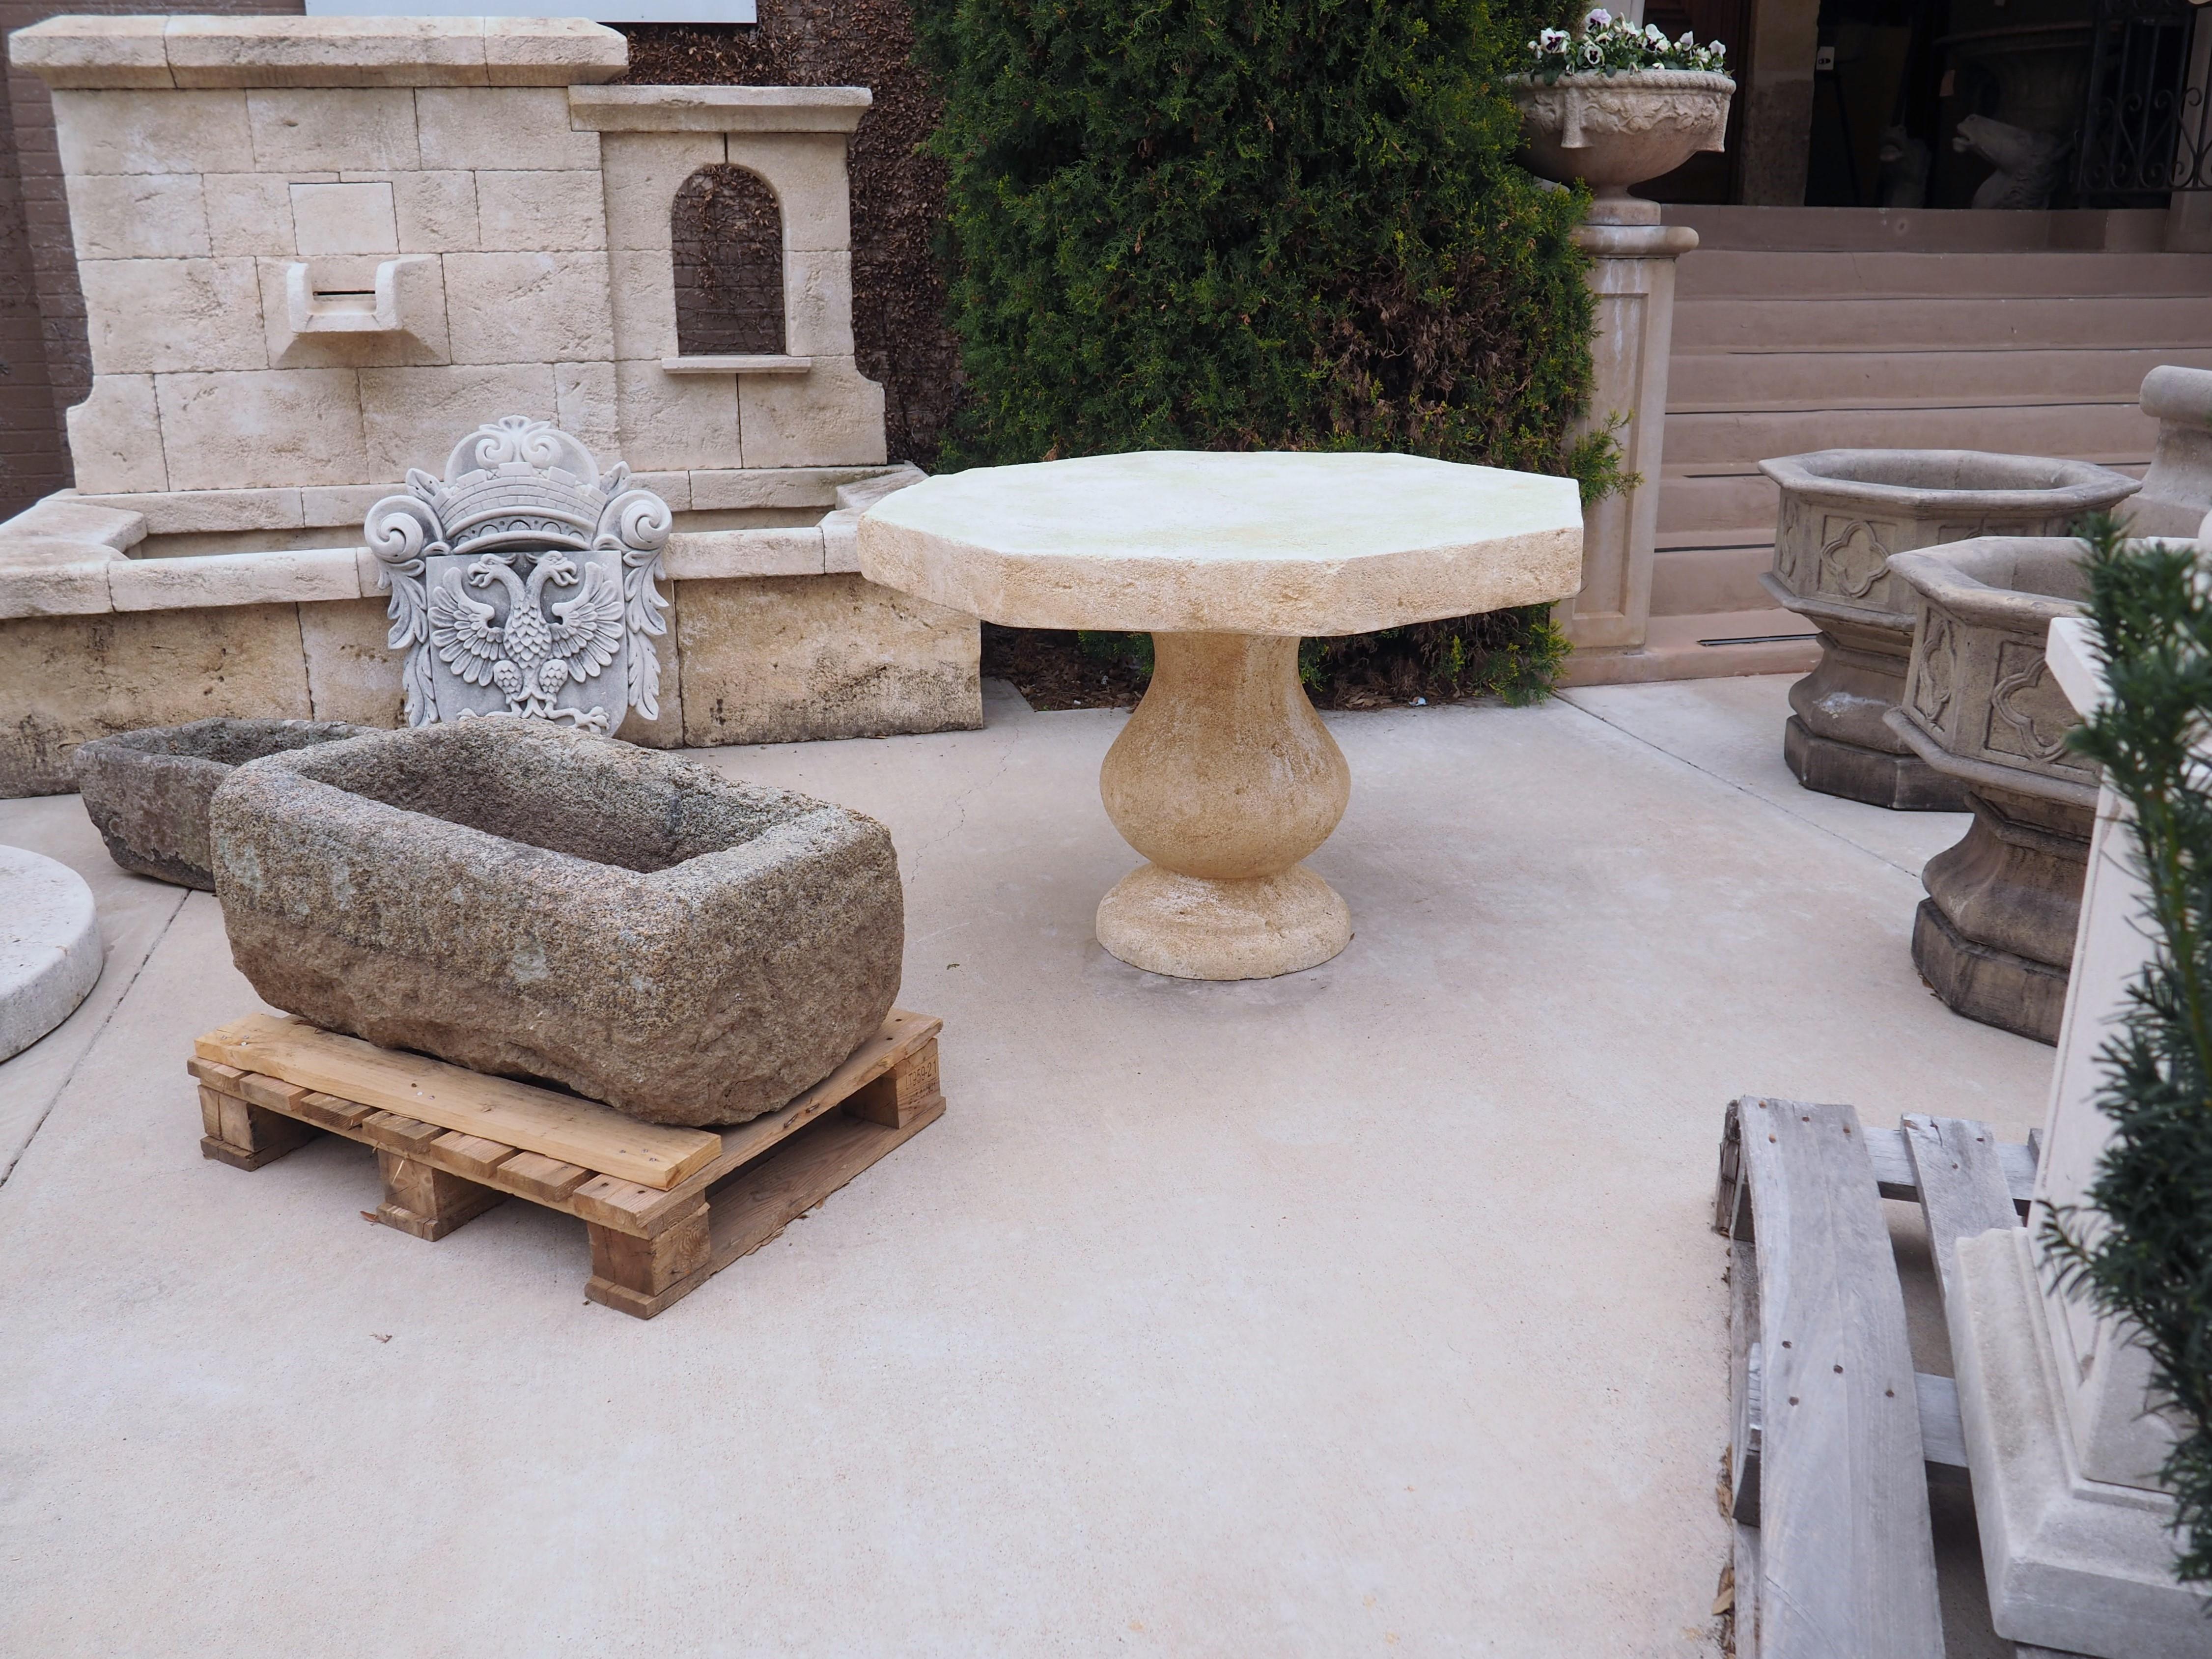 This versatile, hand carved, octagonal stone table from France can be used outside as well as inside. It is made of French estaillade limestone, which has been used for centuries in the creation of outdoor pieces. When the limestone is quarried, it